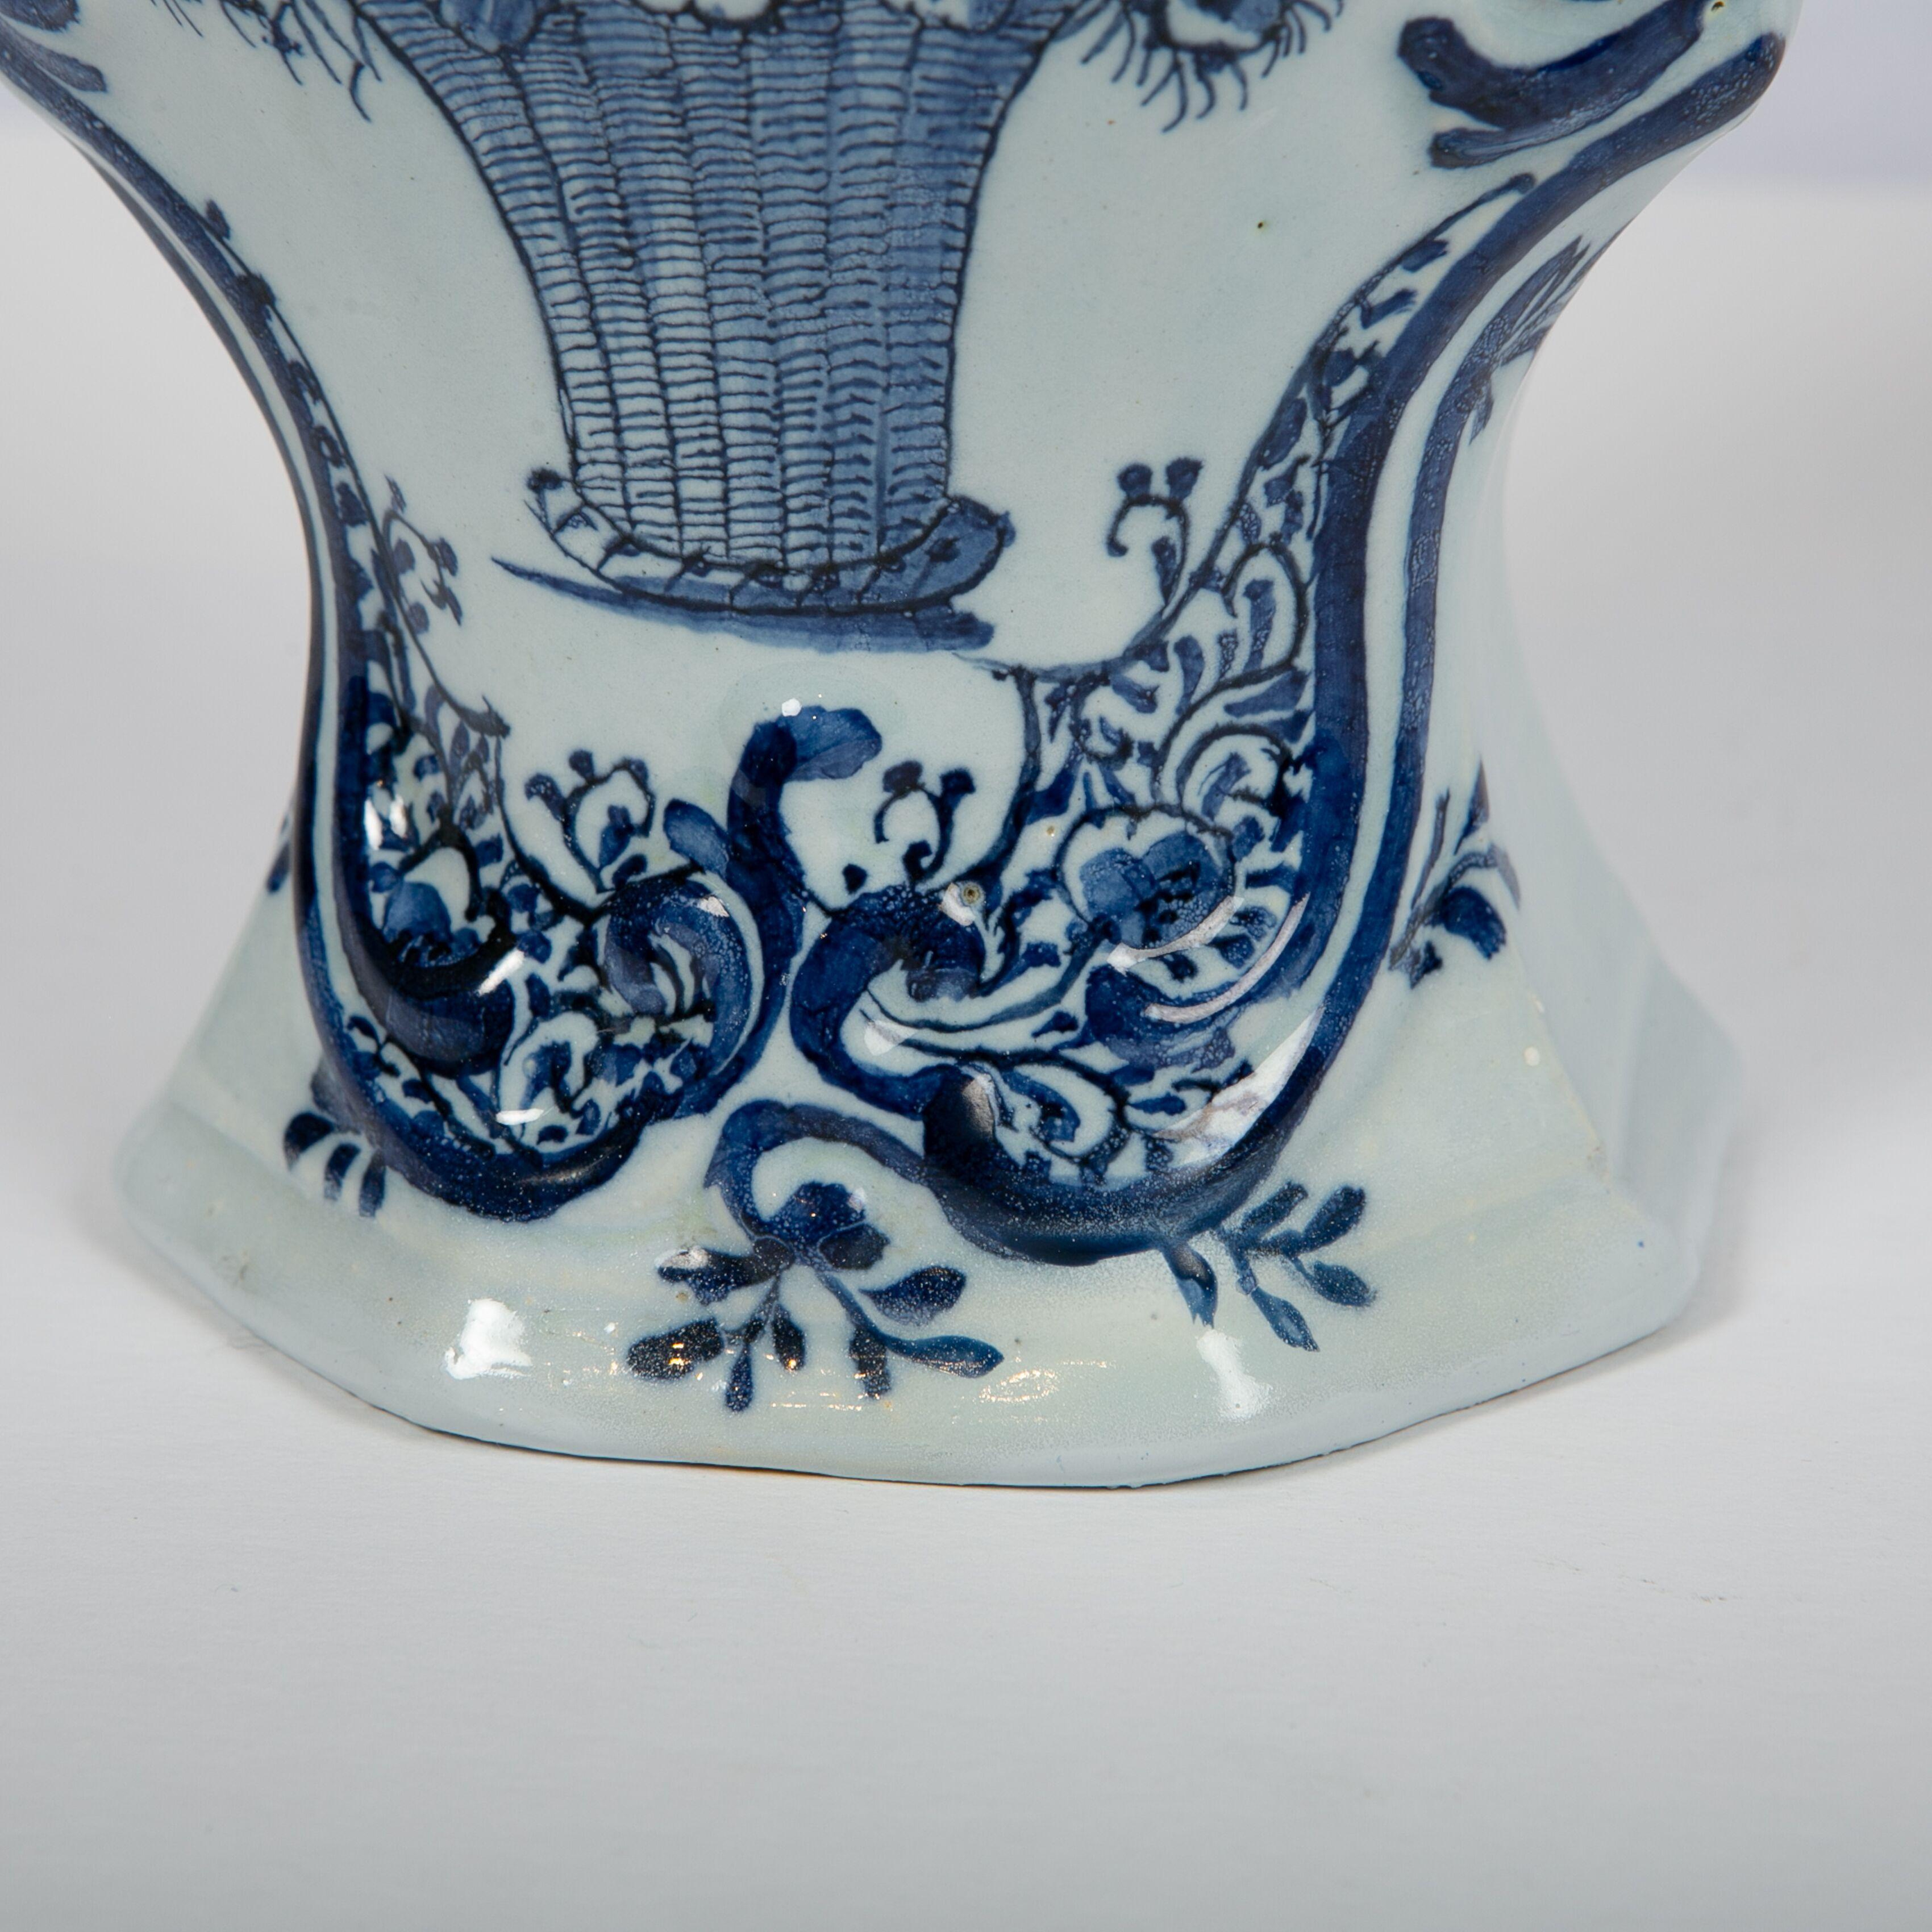 19th Century Pair of Blue and White Dutch Delft Mantle Jars Made, Netherlands, circa 1820